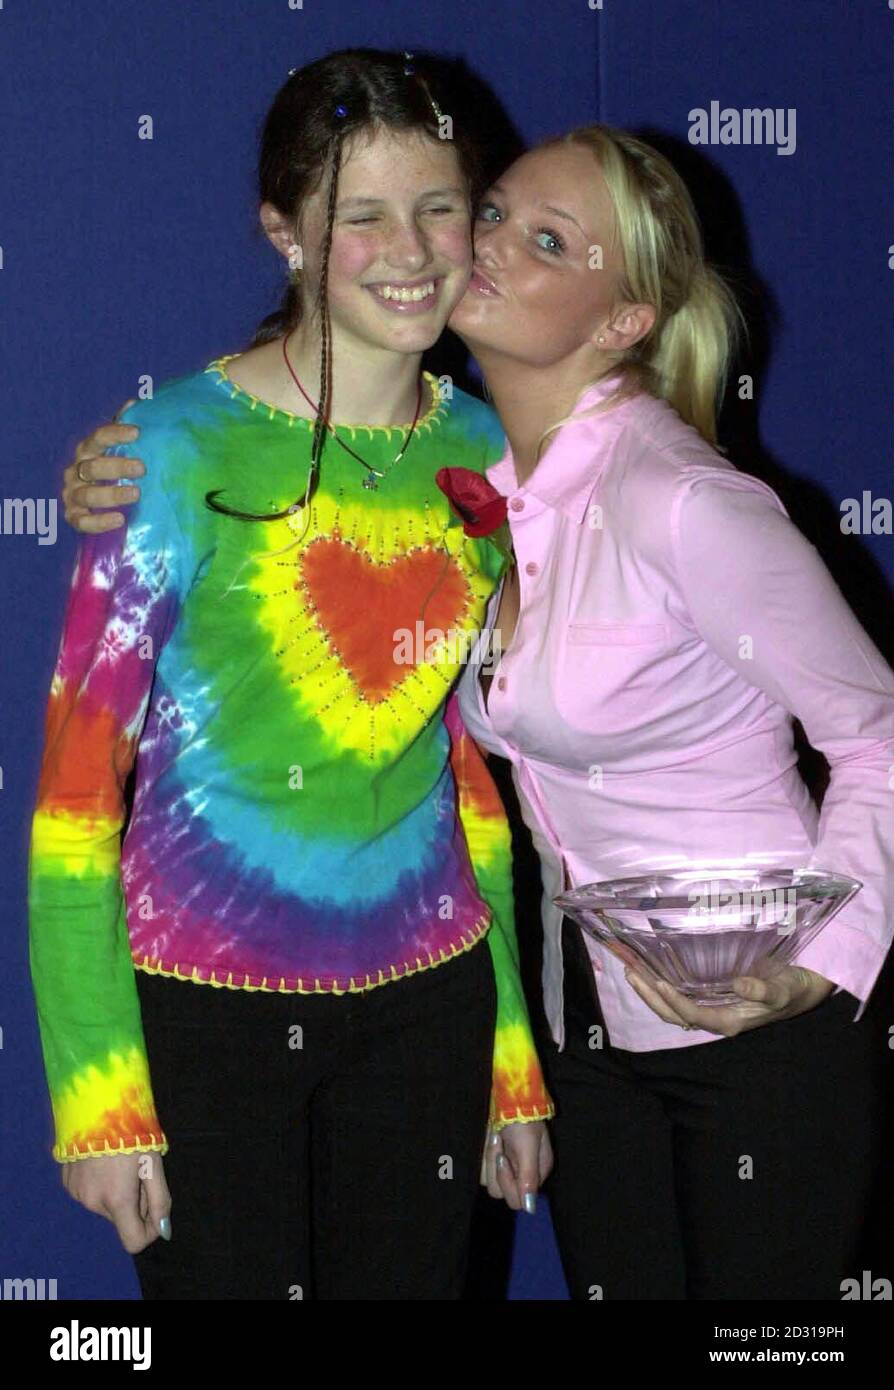 People of The Year 2000 award winner Josie Russell (left) with Spice Girl Emma Bunton, who presented the glass trophy to her in Park Lane, London. Stock Photo